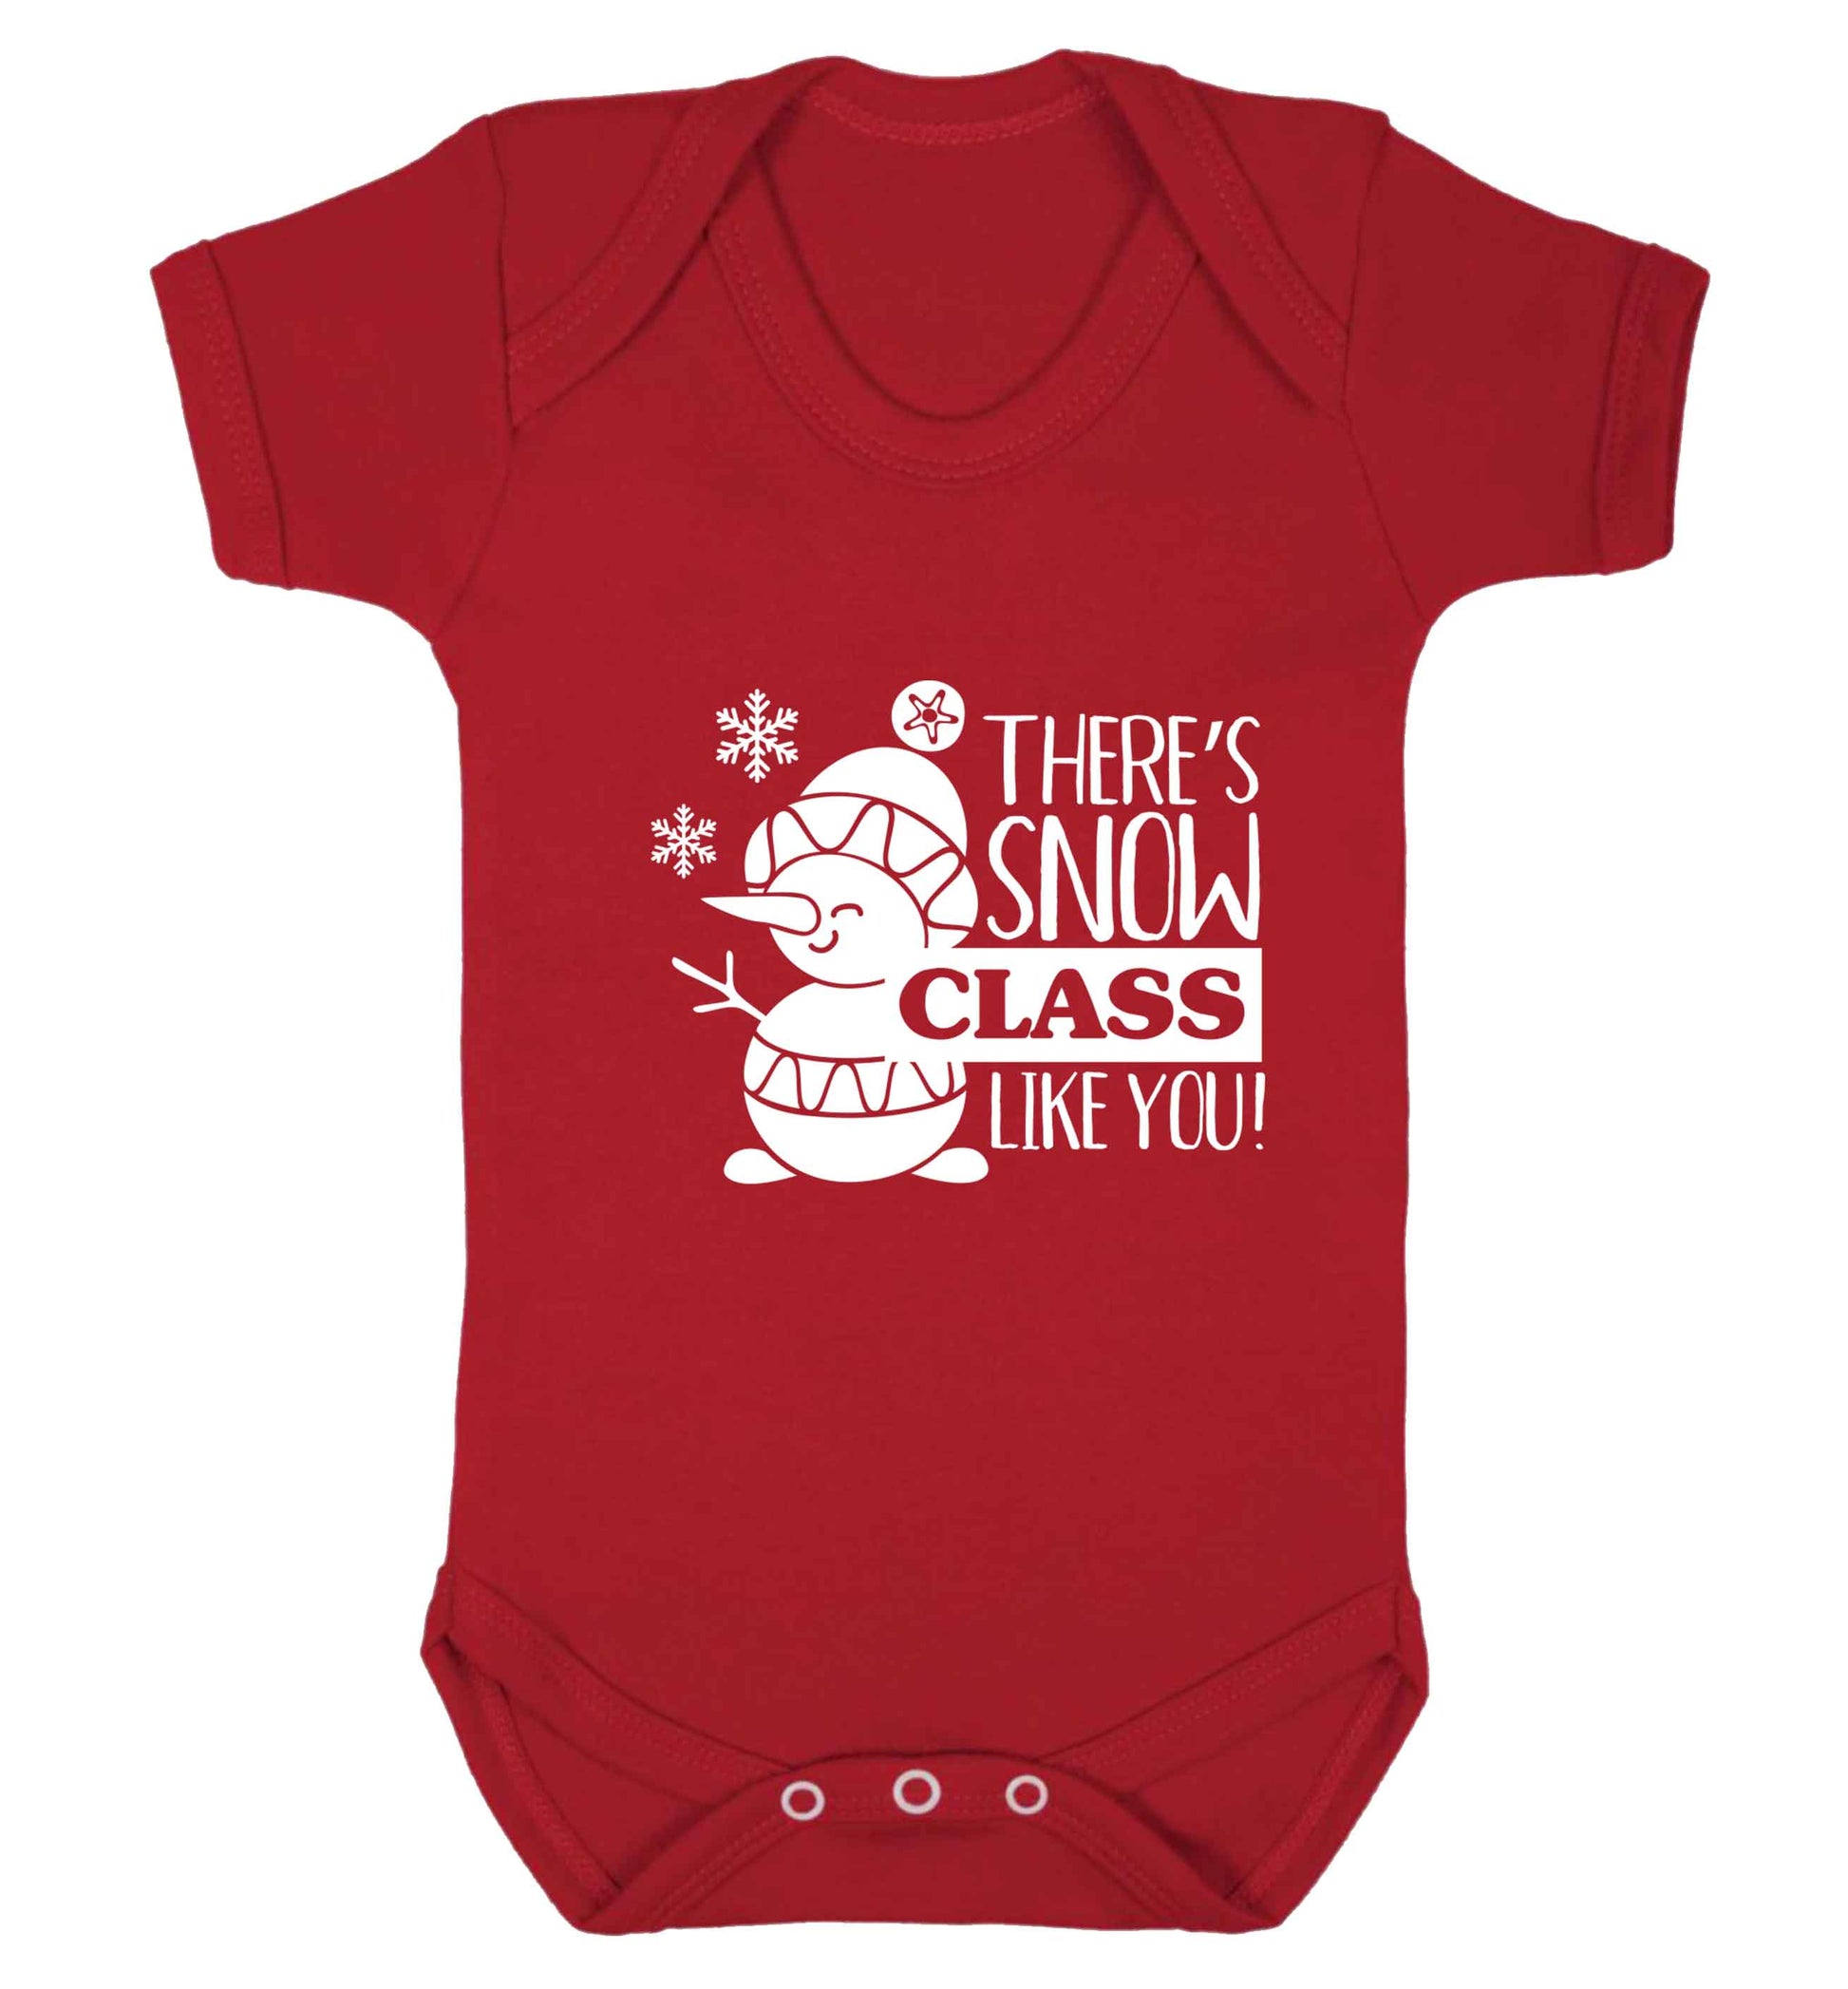 There's snow class like you baby vest red 18-24 months